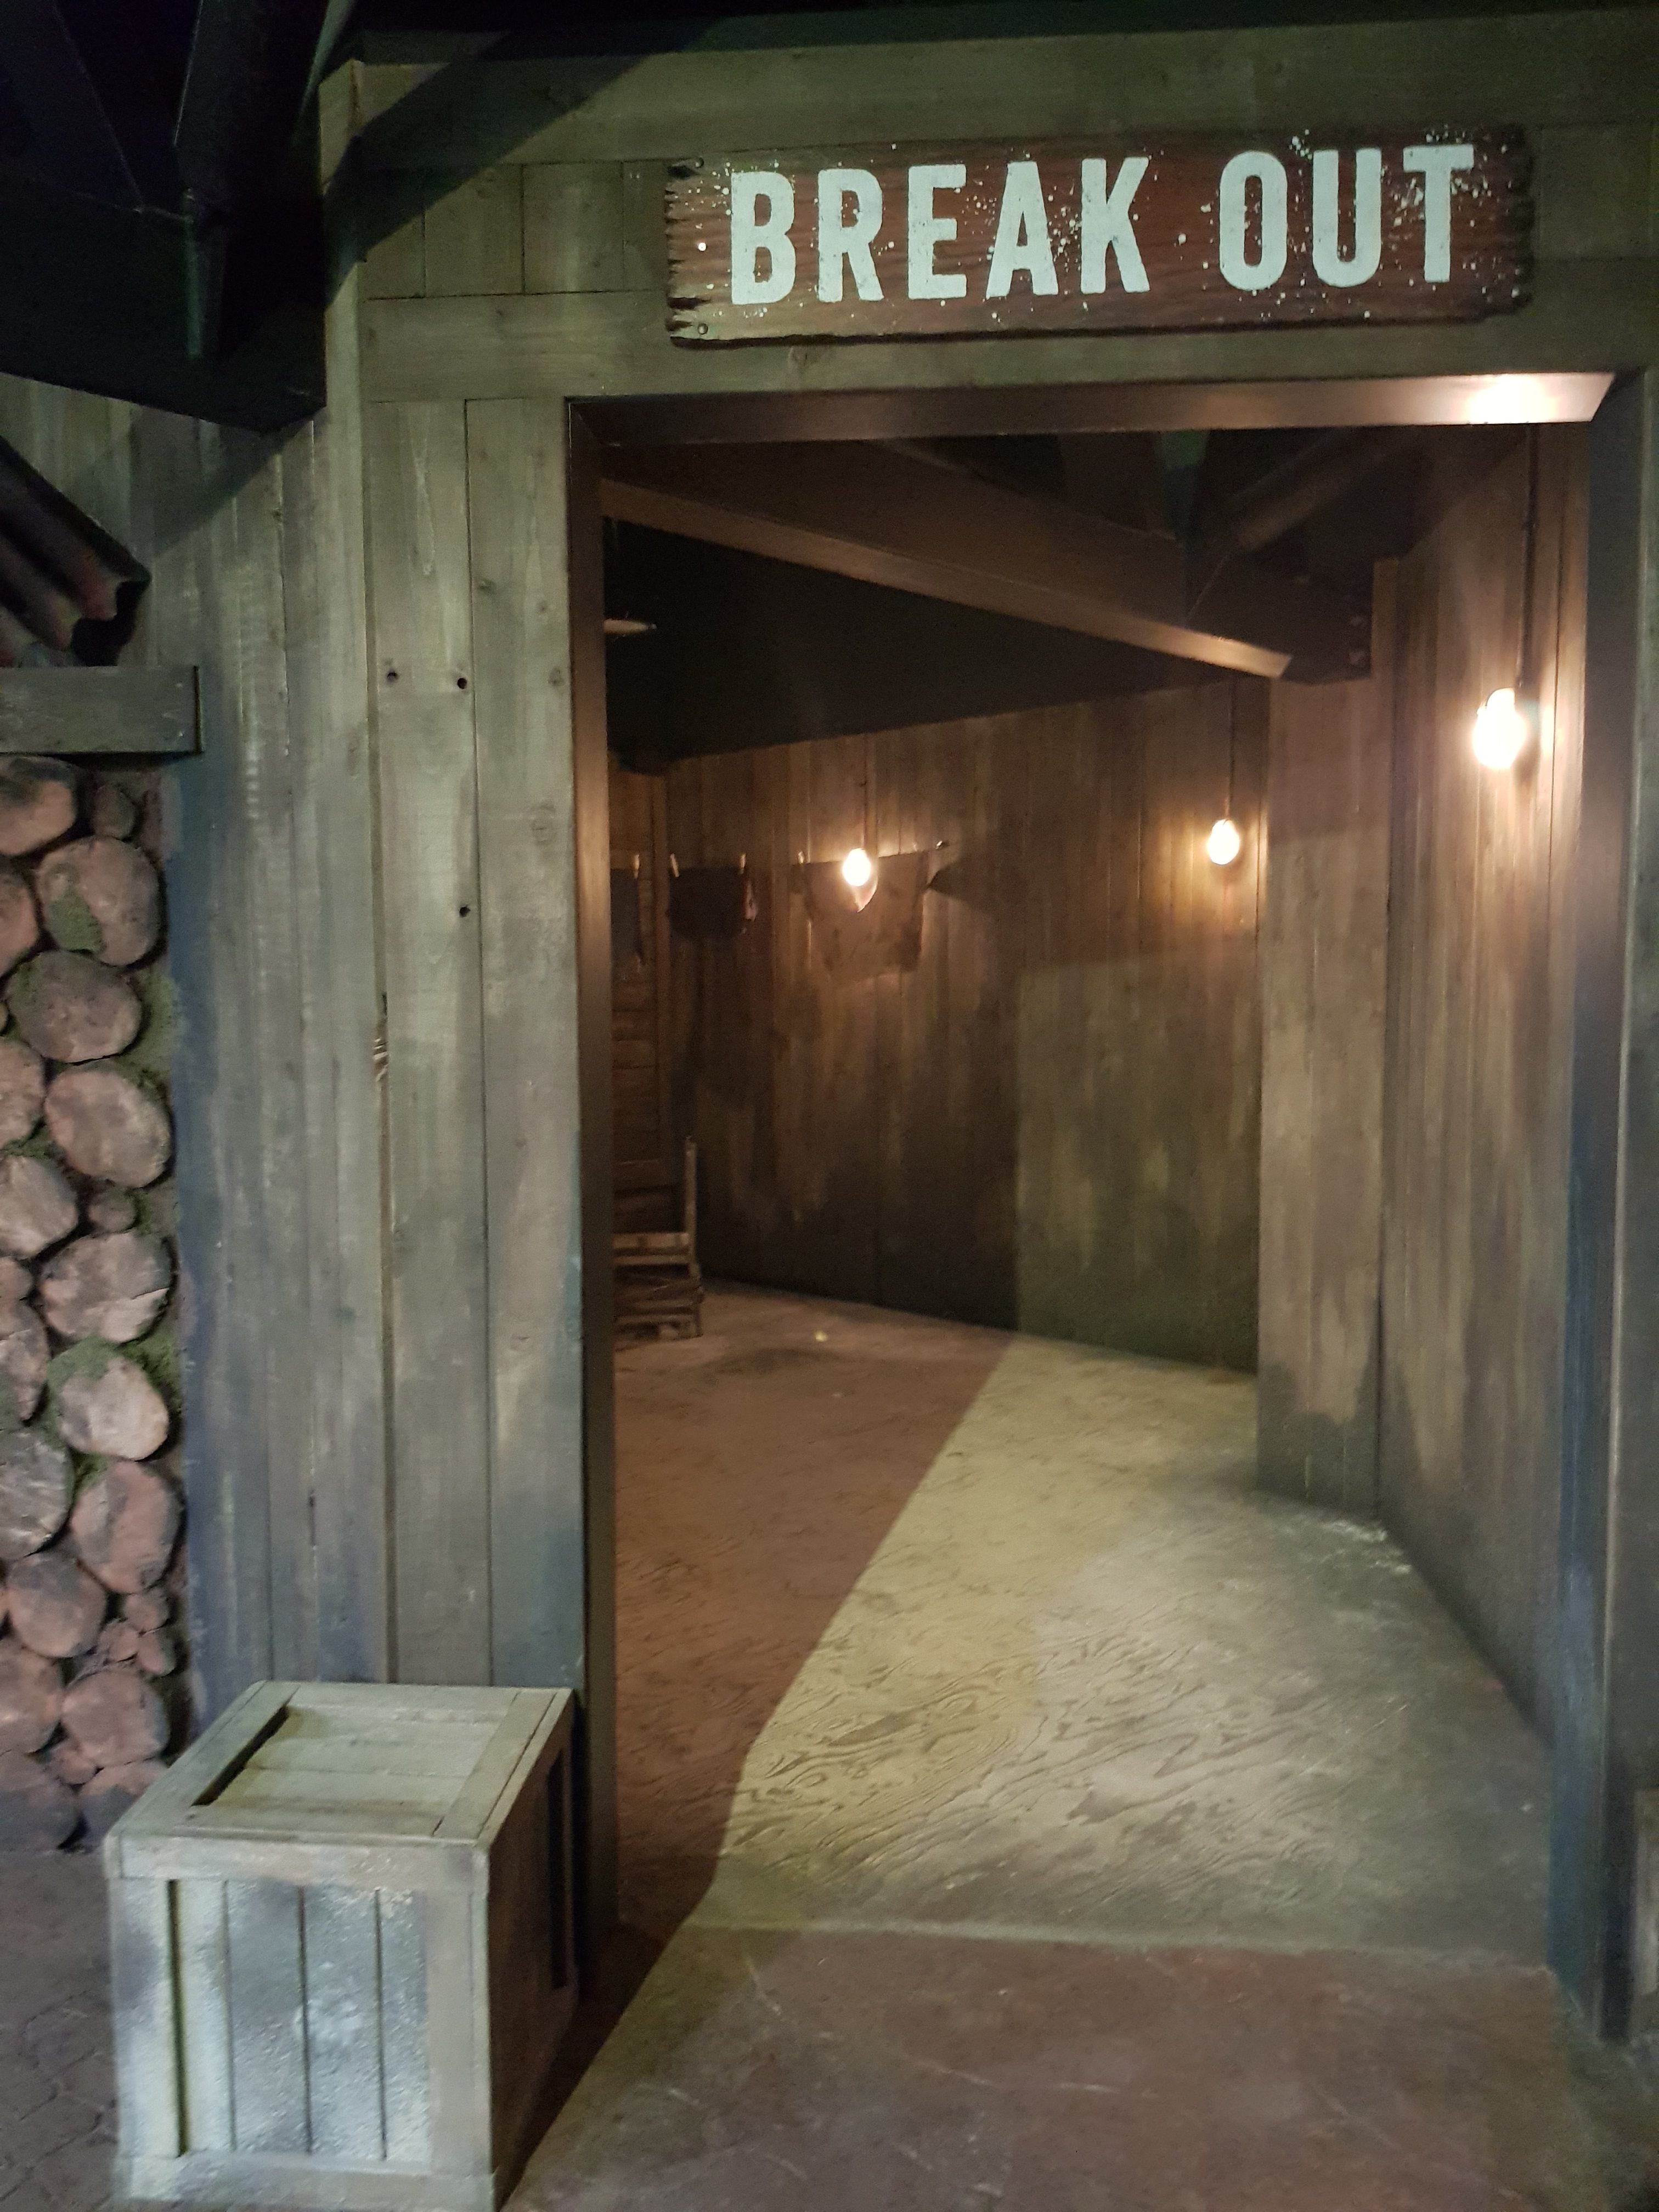 Entrance to the Break out escape room at the Bear Grylls Adventure. A Wooden door frame with BREAK OUT written above leading into a wooden corridor with a small wooden box outside